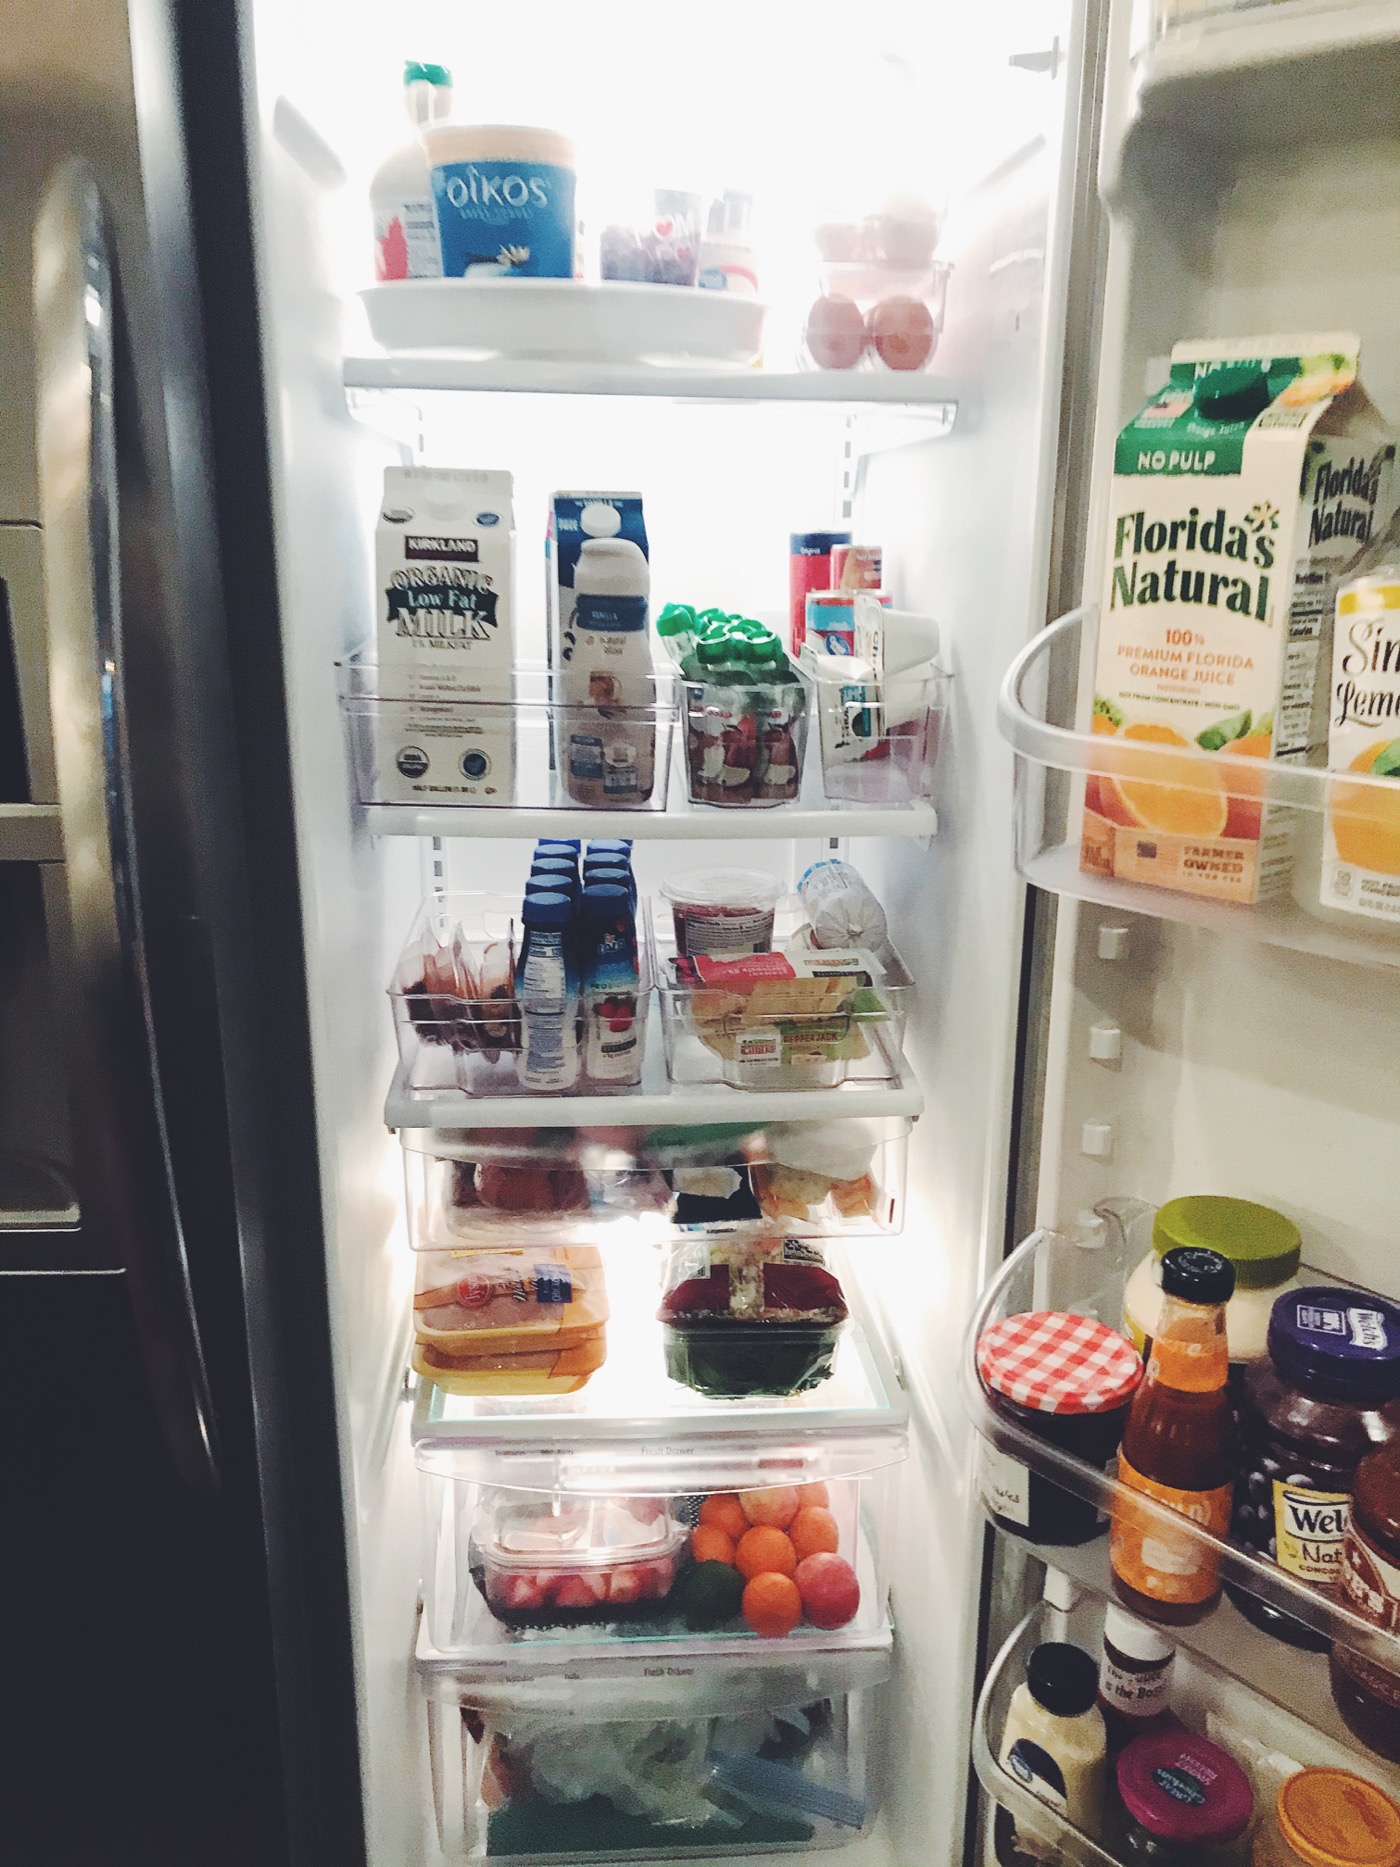 How To Organize Your Refrigerator - Life Love Larson